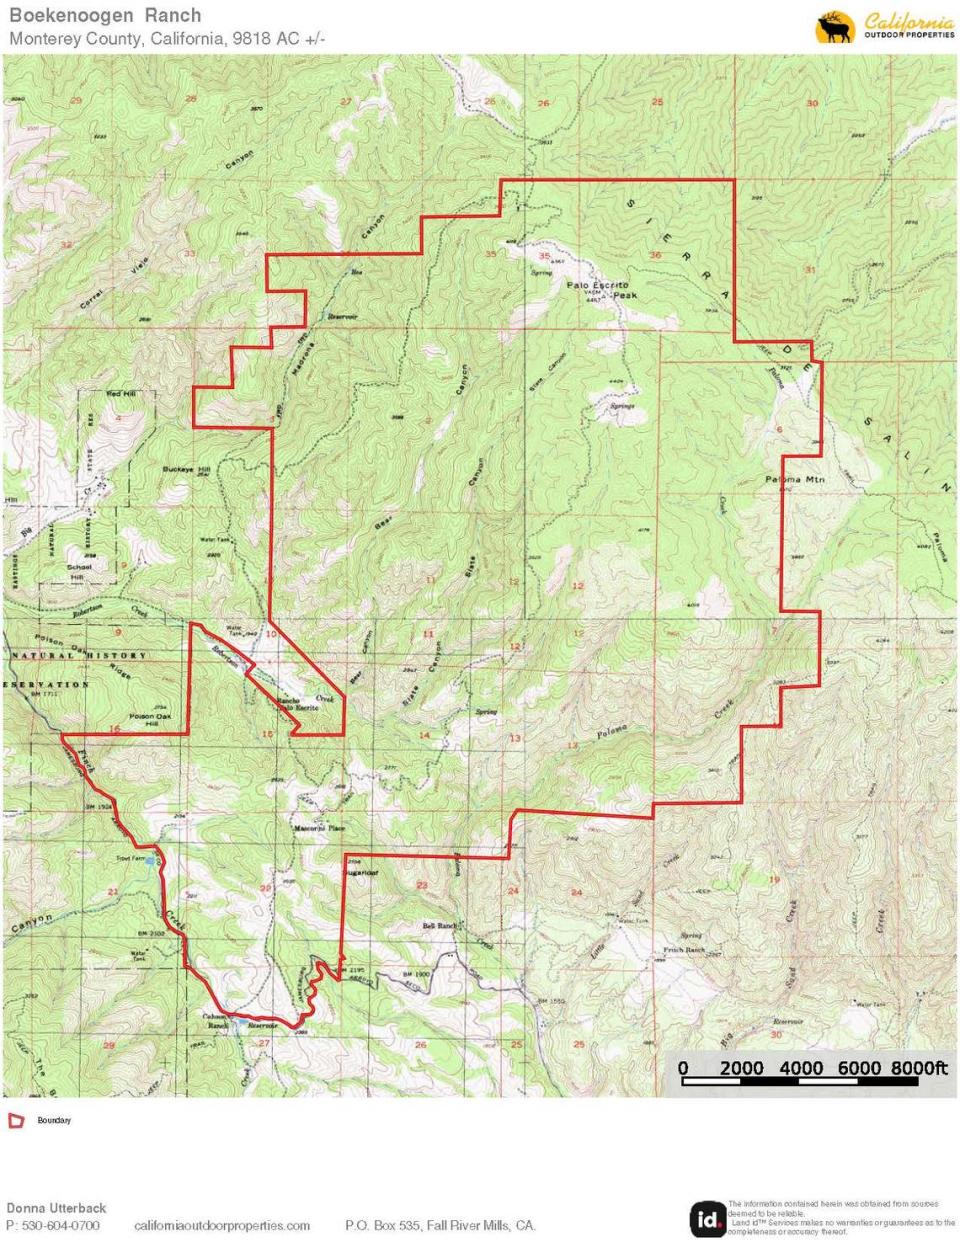 A map shows the property line for a ranch for sale in the Carmel Valley of California that includes the highest peak in the Sierra de Salinas range. California Outdoor Properties